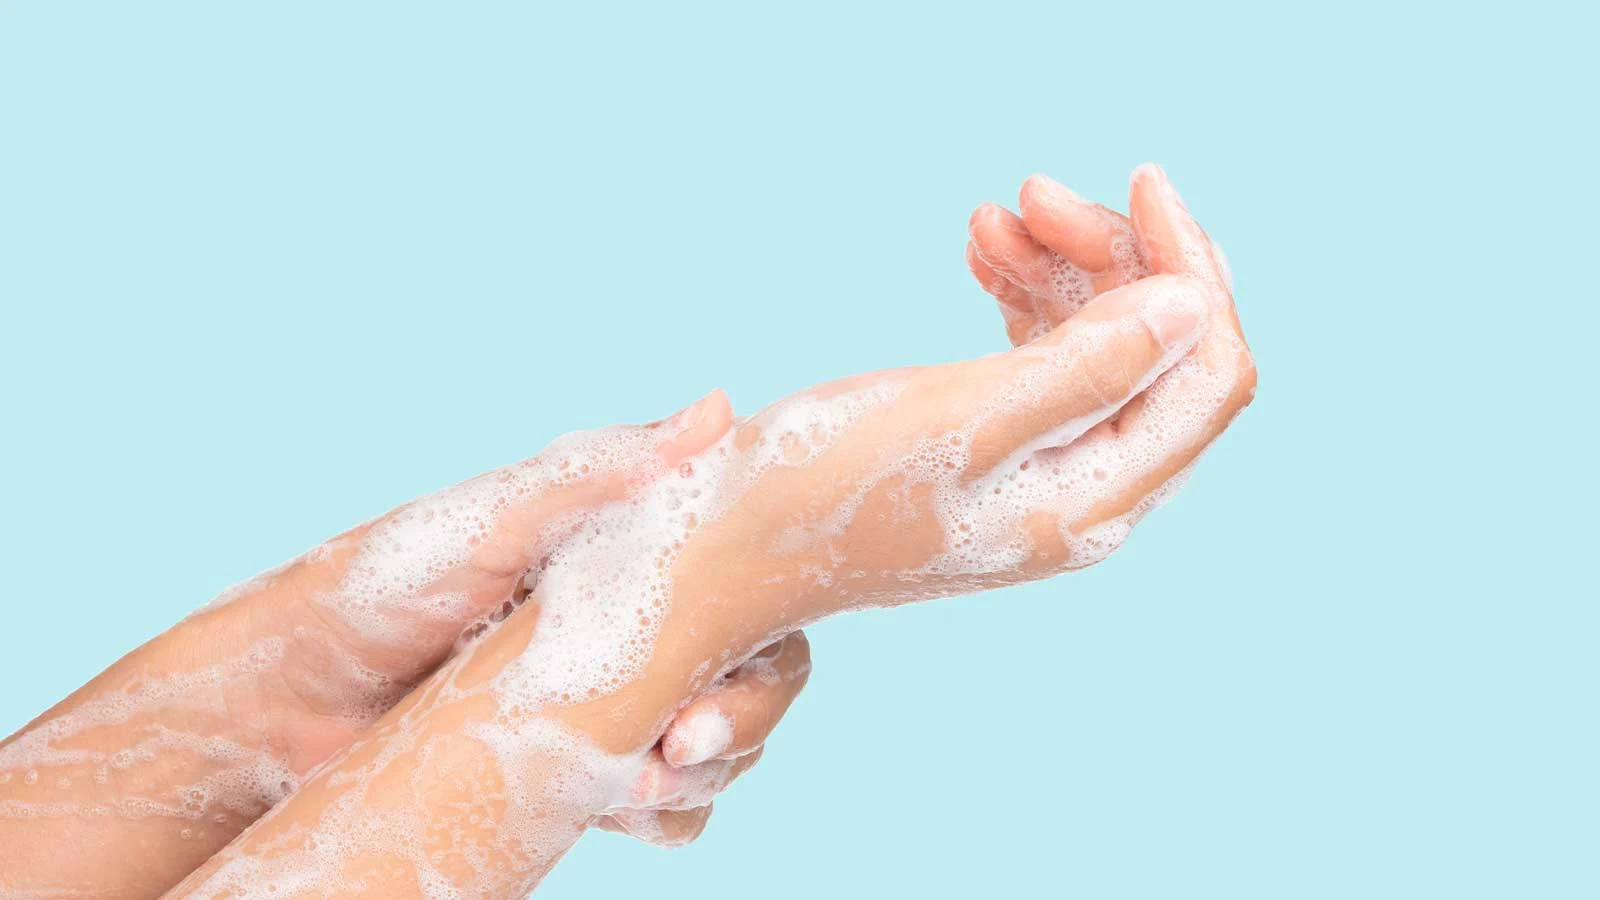 Arms Washing with Soap